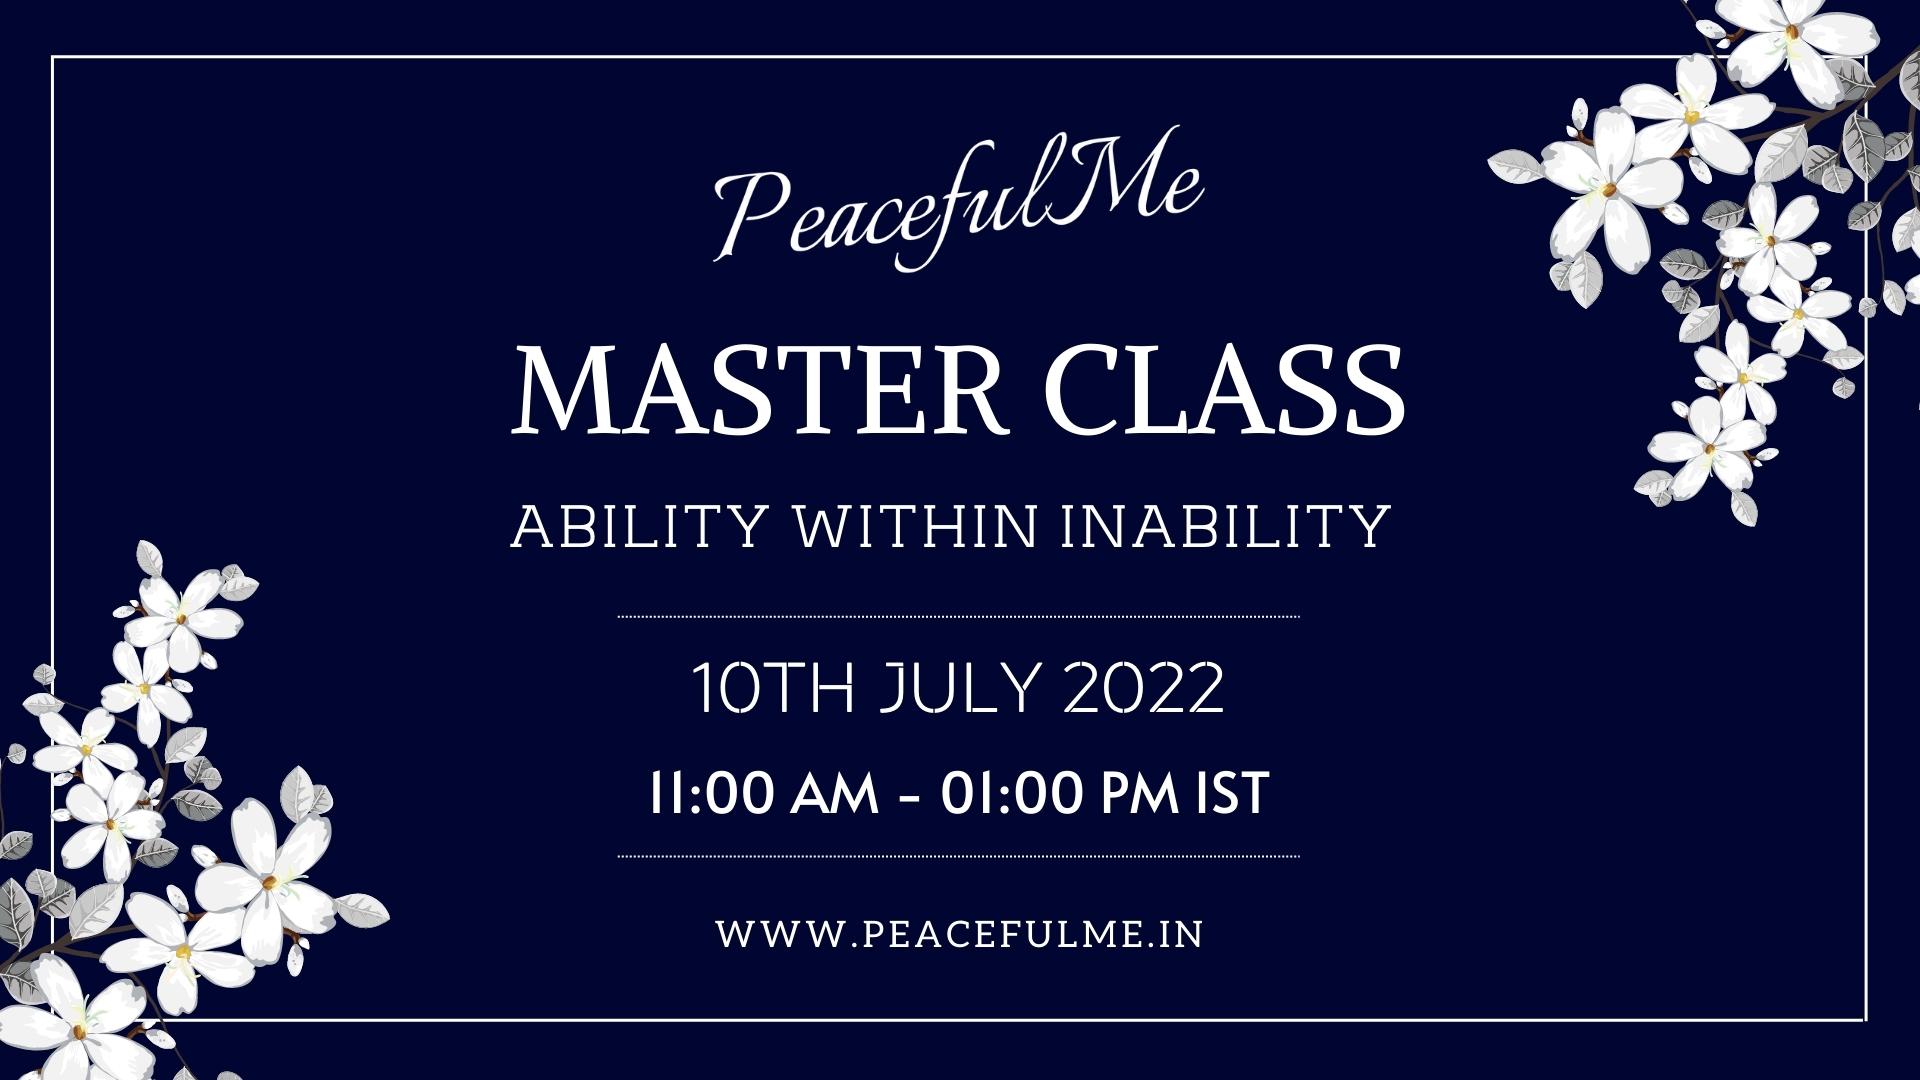 MASTER CLASS ABILITY WITHIN INABILITY